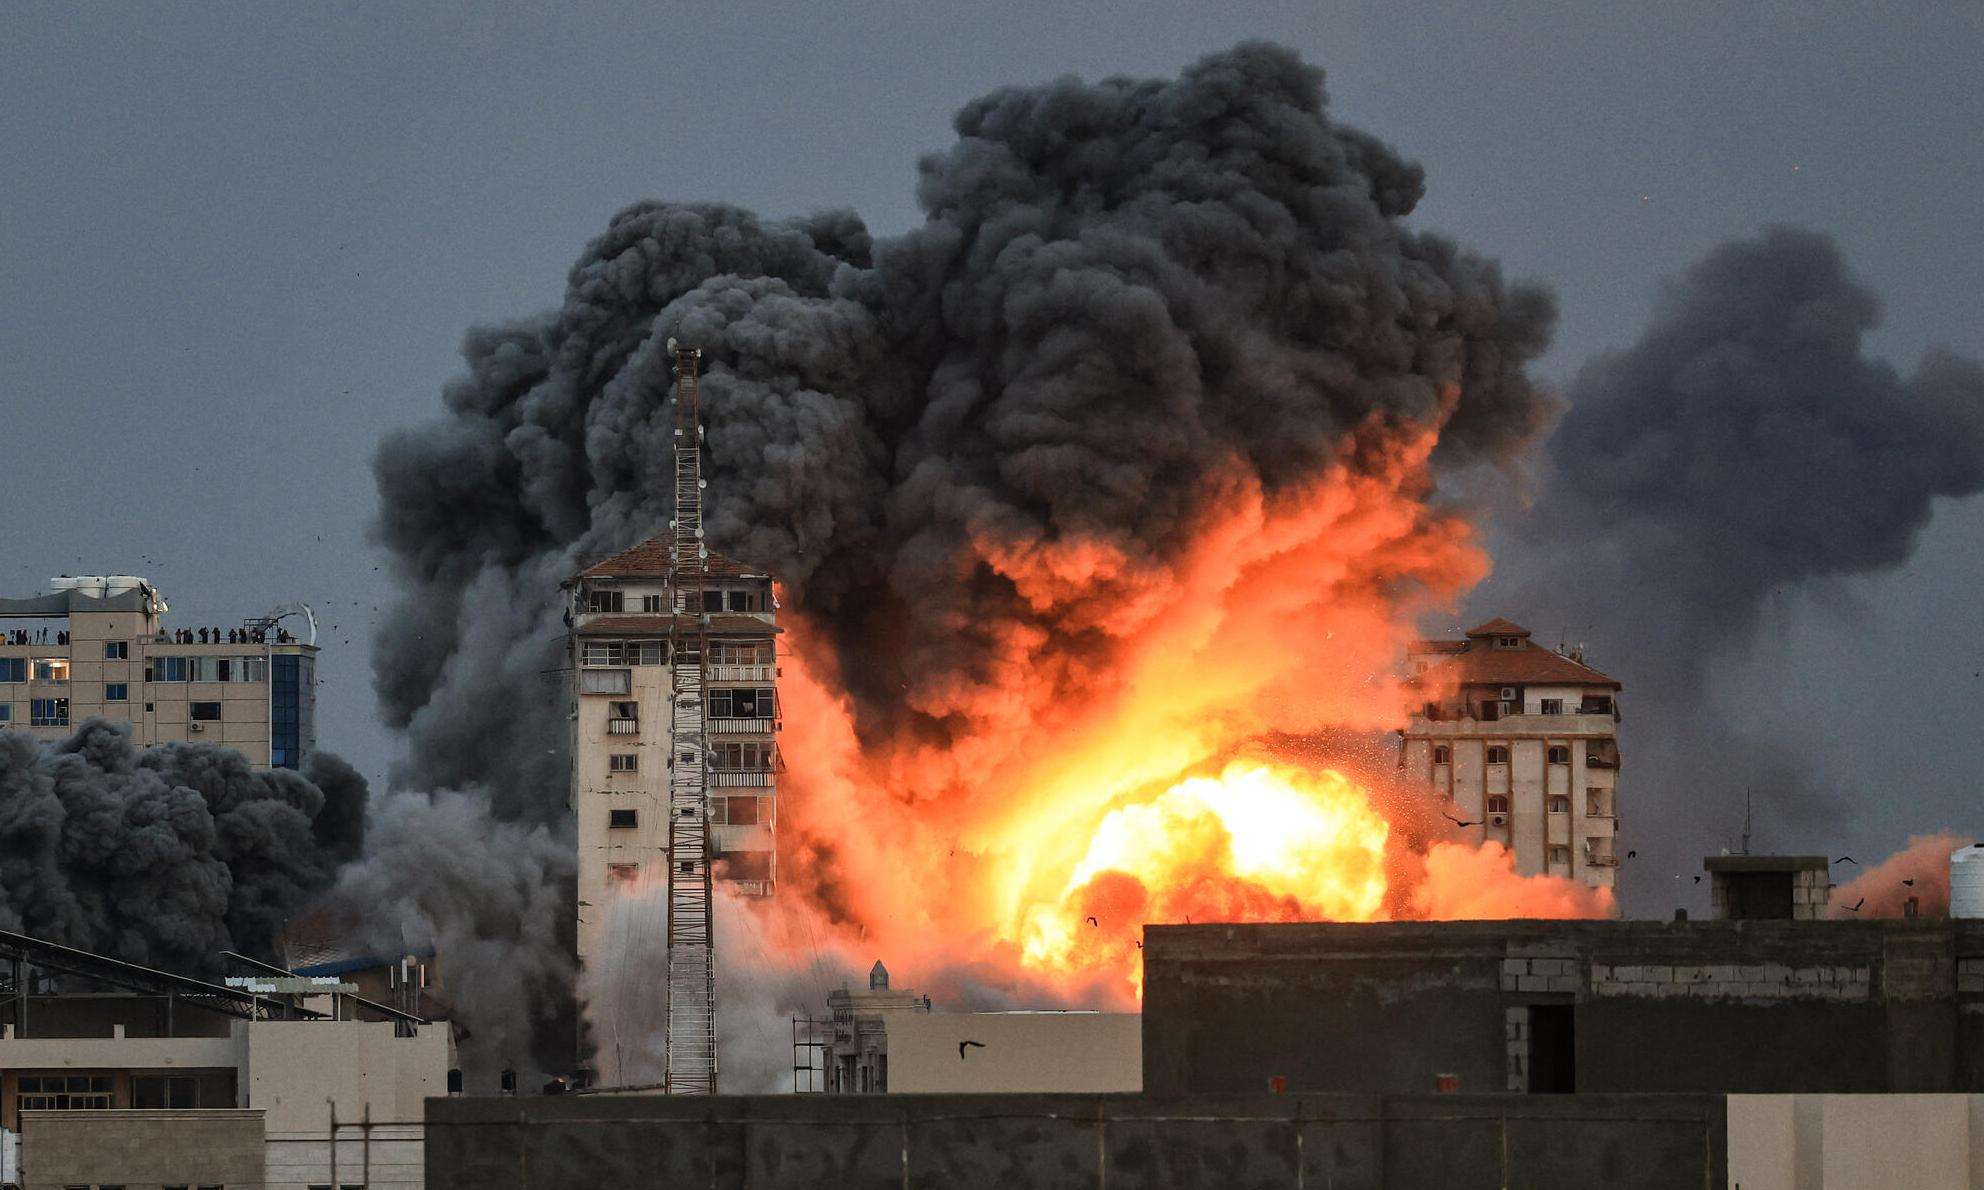 Flames and smoke from an explosion in Israel's attack on Gaza.